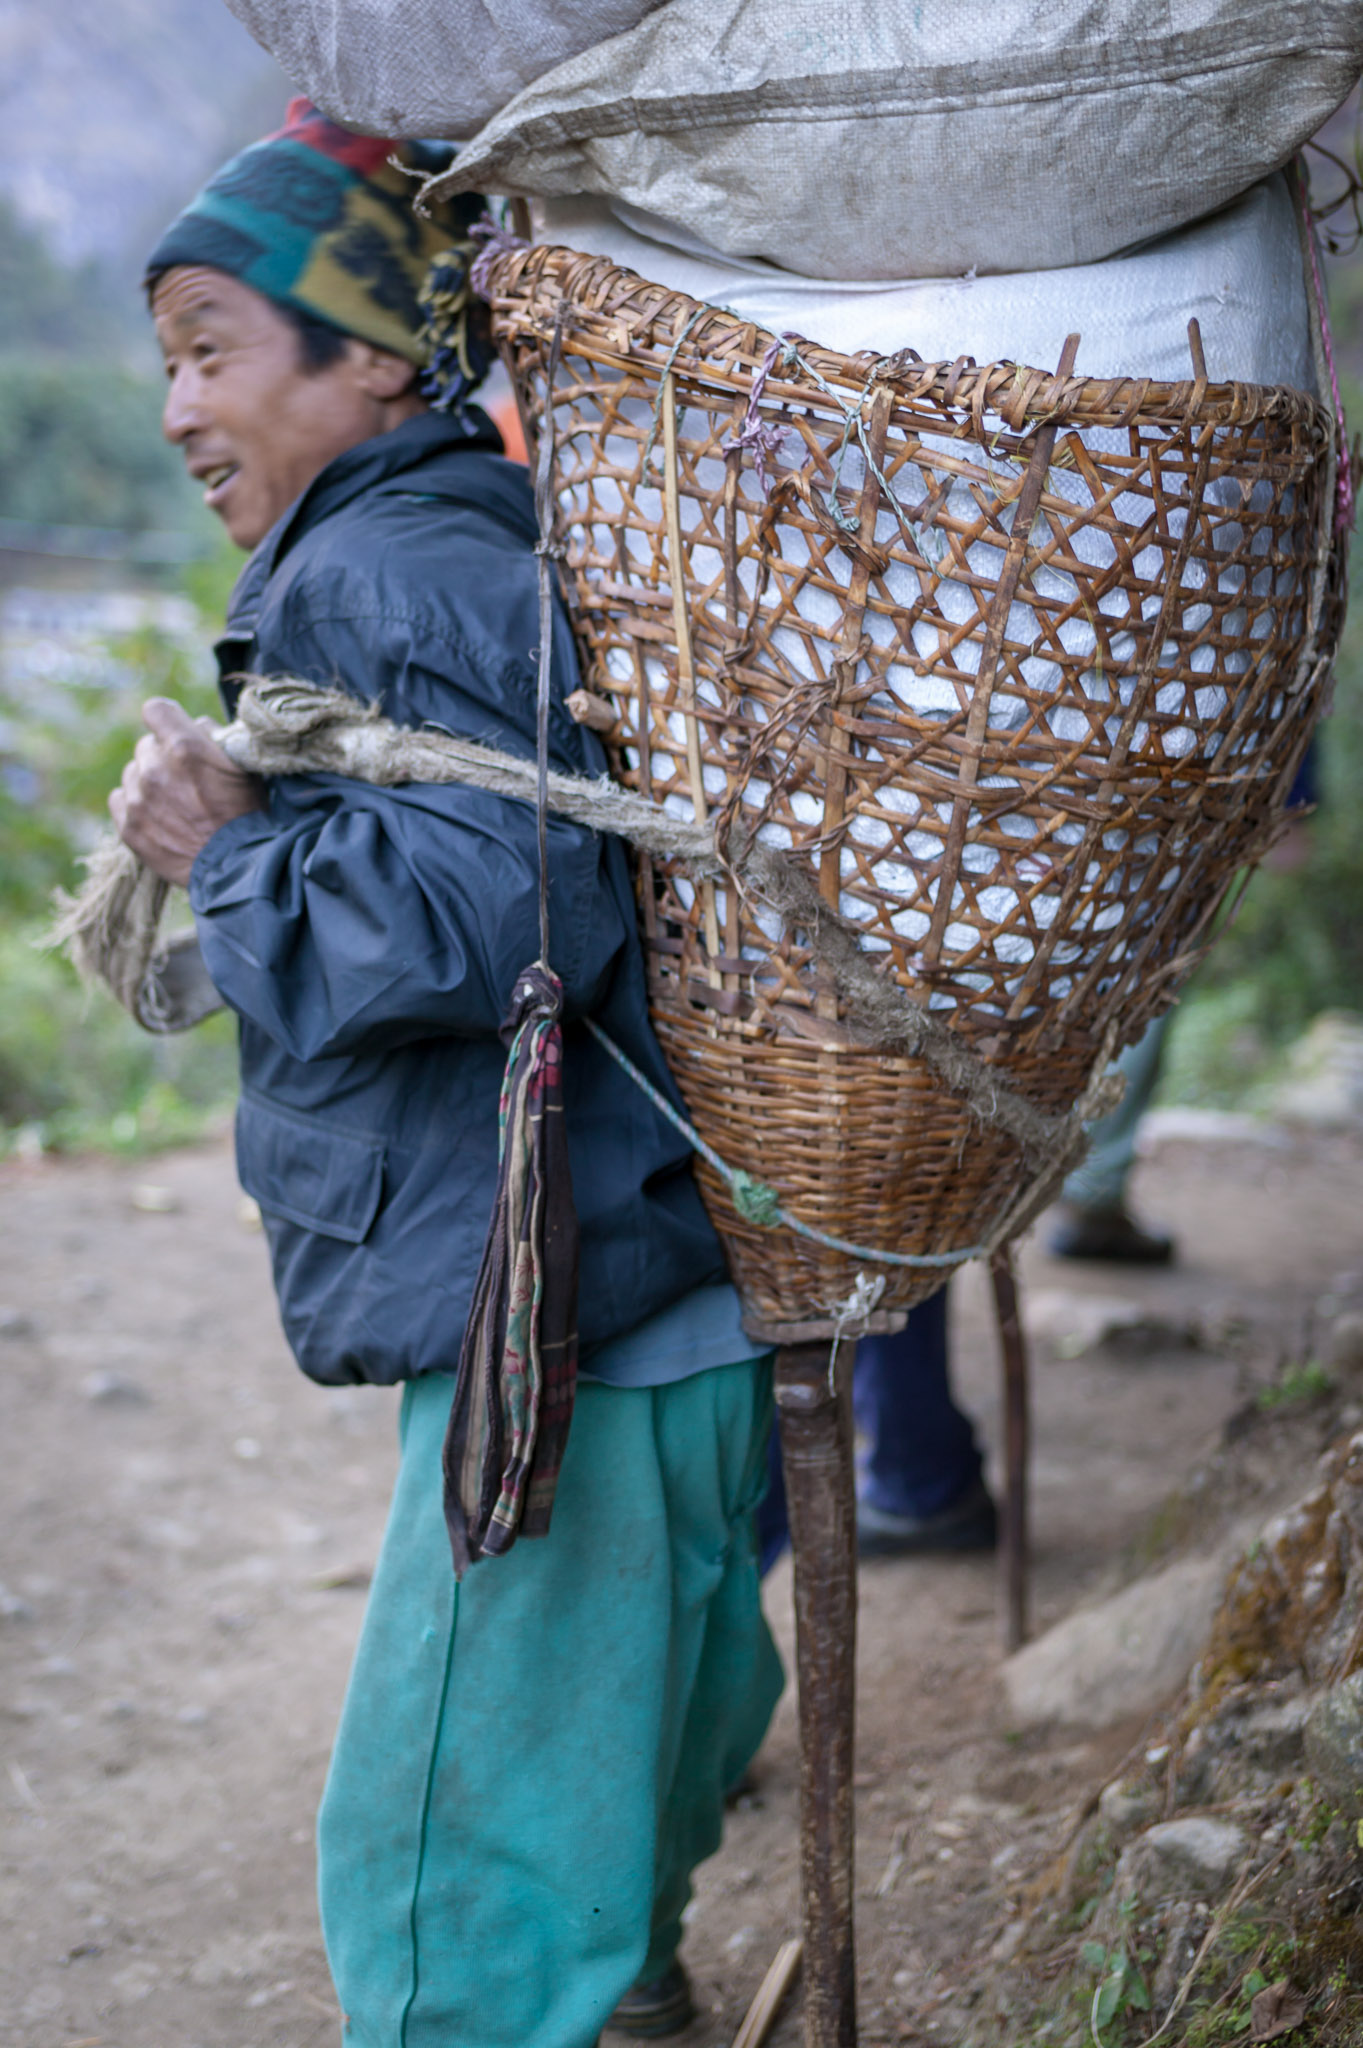 Porters carry walking stick, also used to rest the load